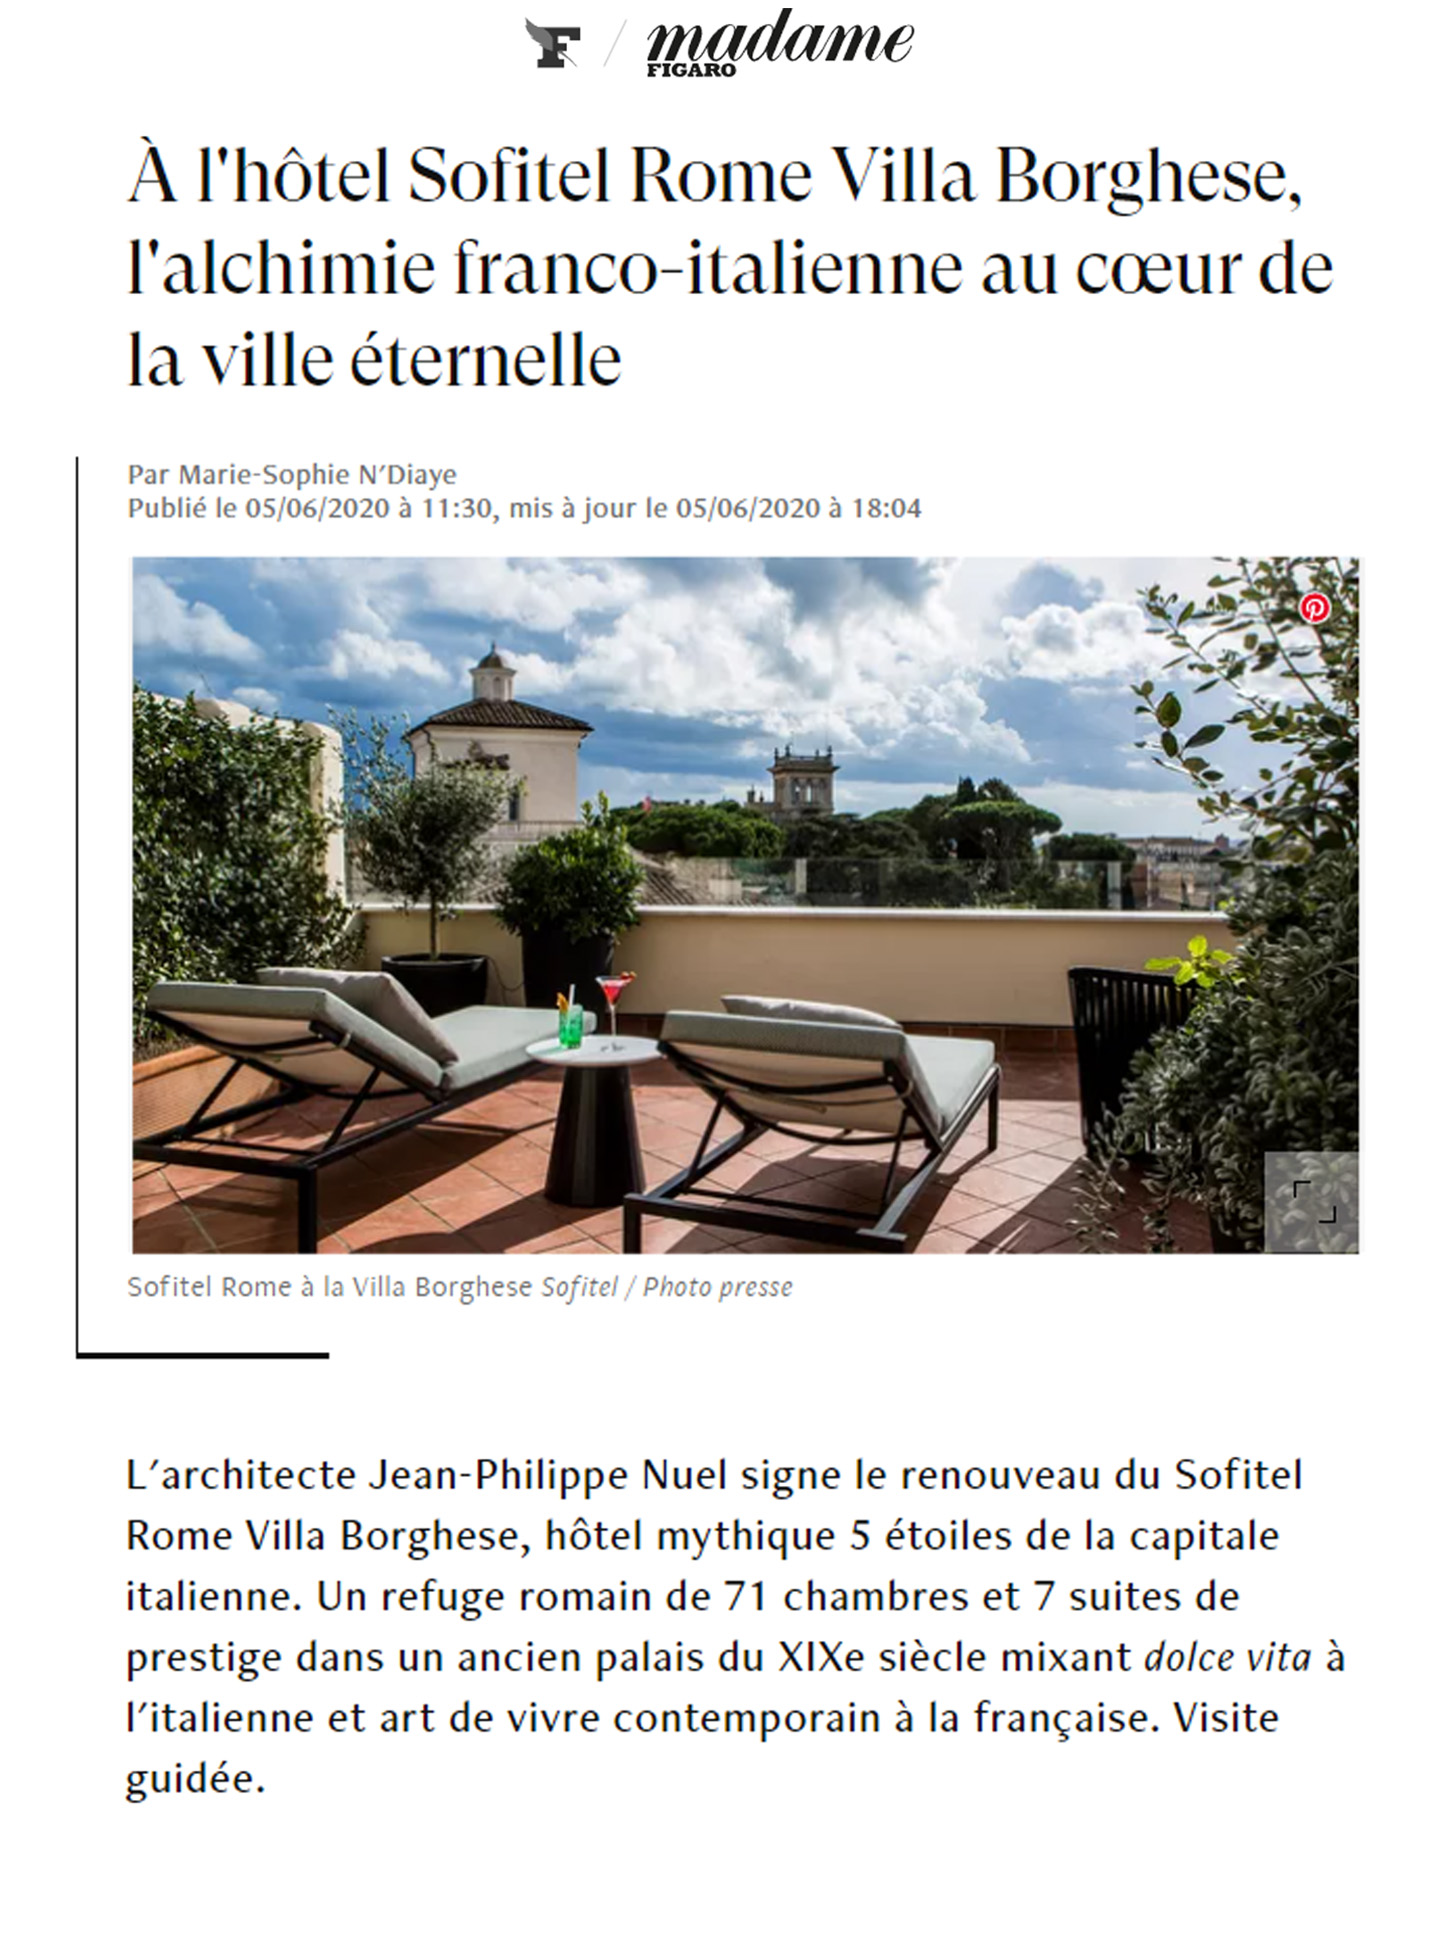 article on the sofitel rome villa borghese, a luxury hotel in the heart of the italian capital designed by the architect and interior designer jean-philippe nuel